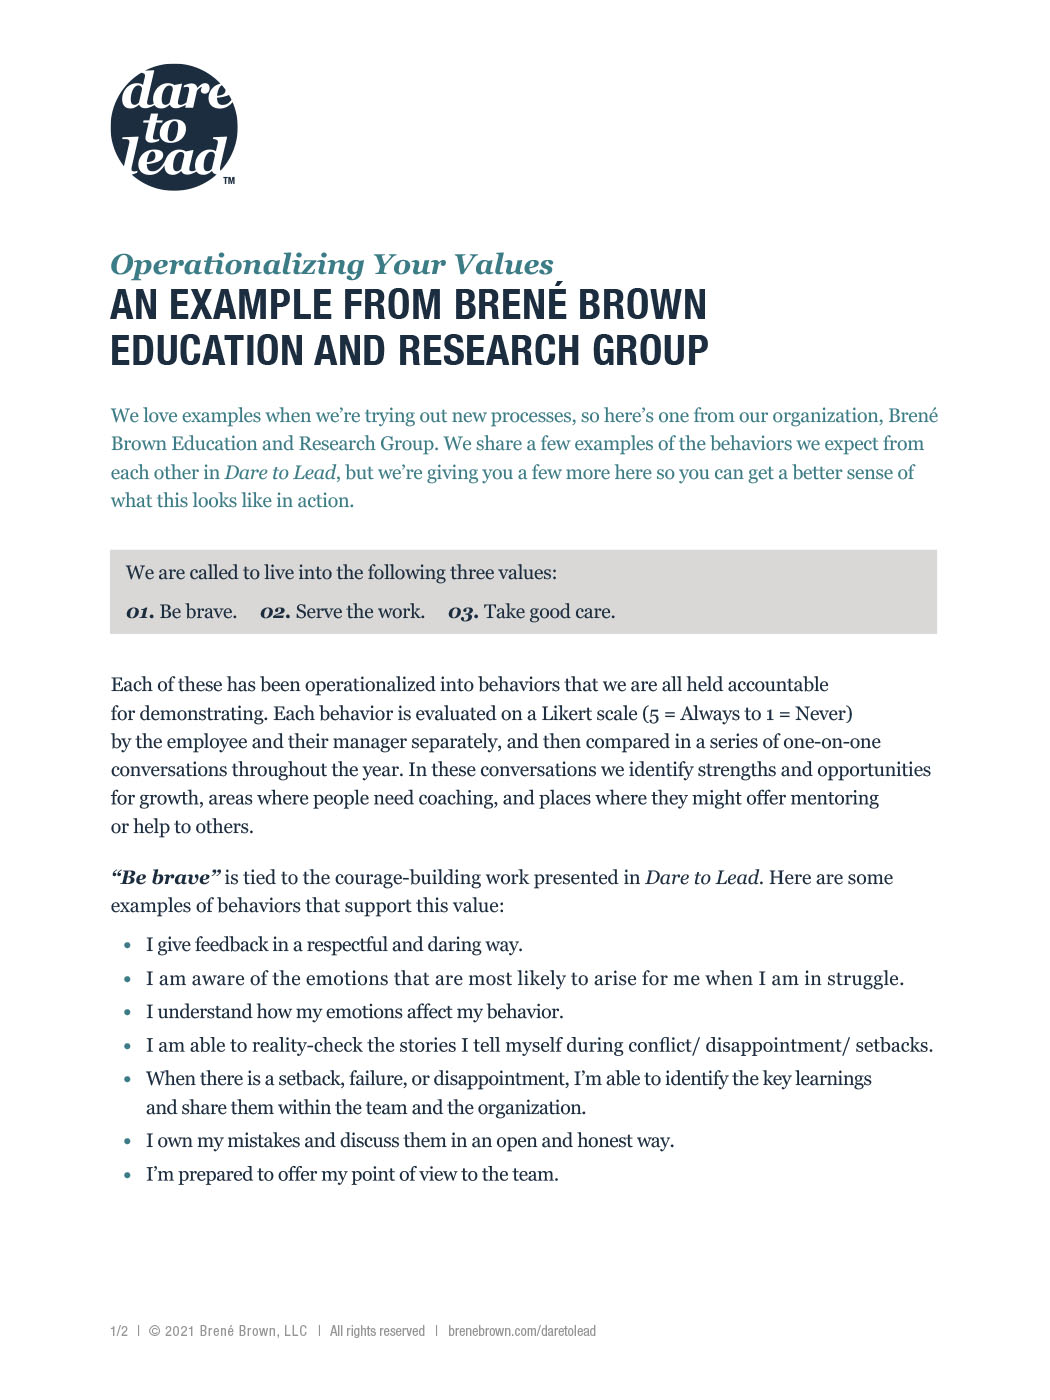 Dare to Lead Operationalizing Your Values: An Example From Brené Brown Education and Research Group